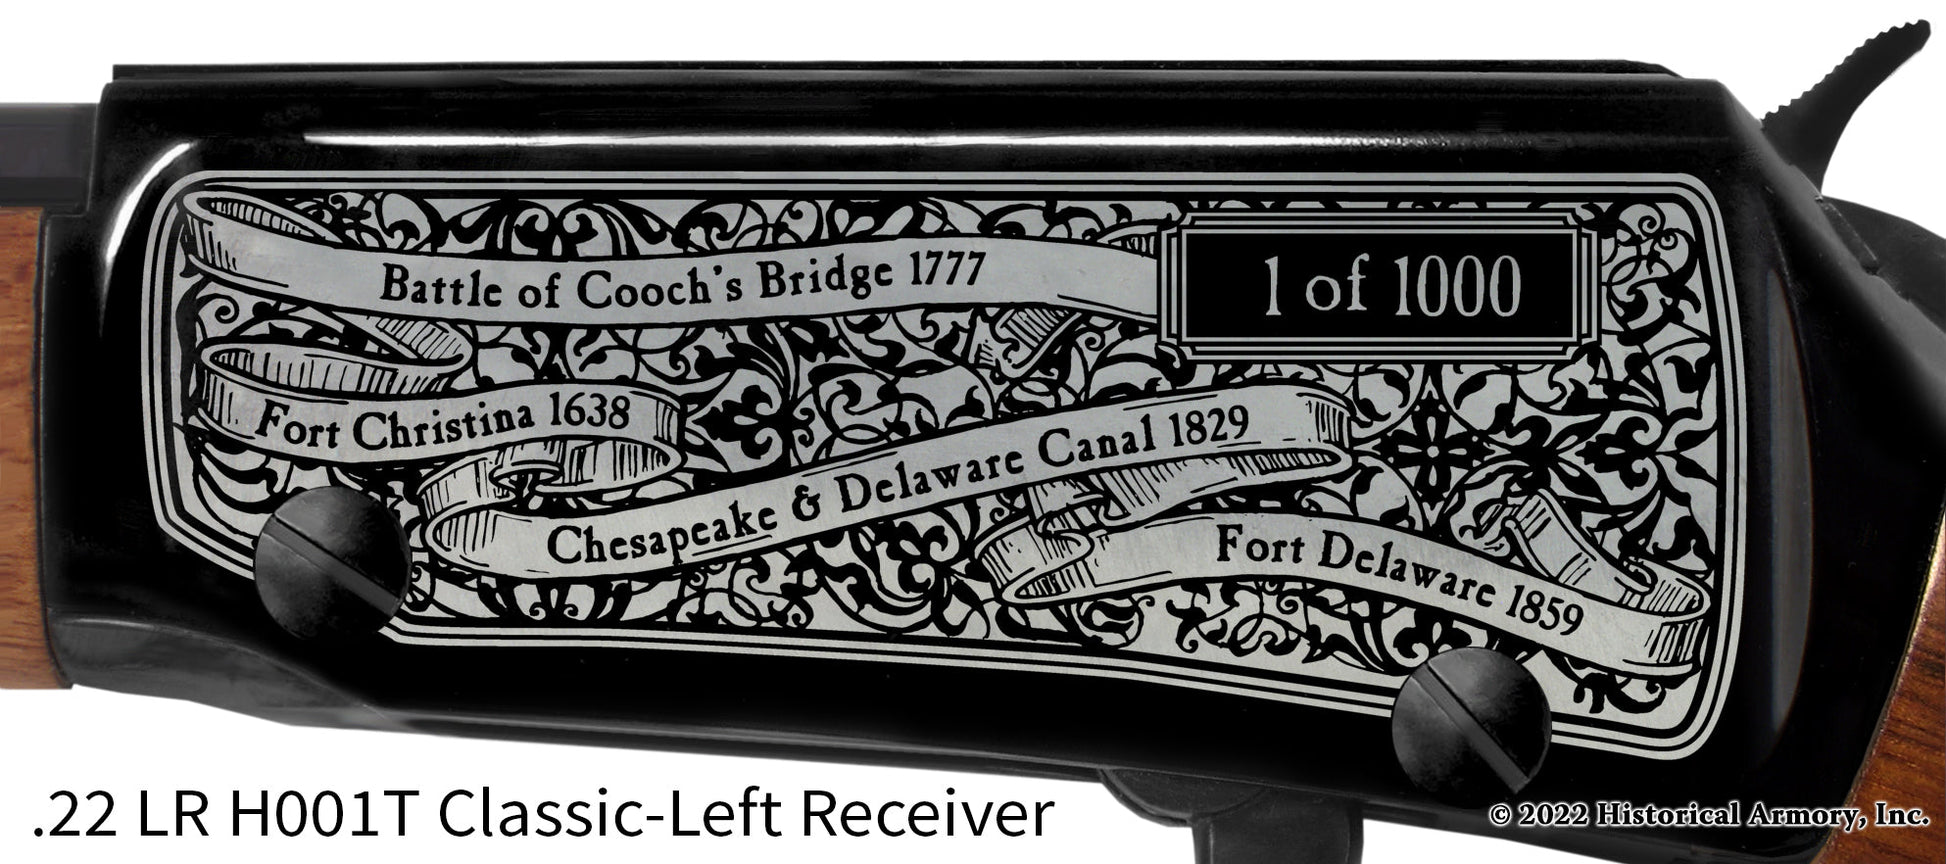 Delaware State Pride Engraved H00T Receiver detail Henry Rifle